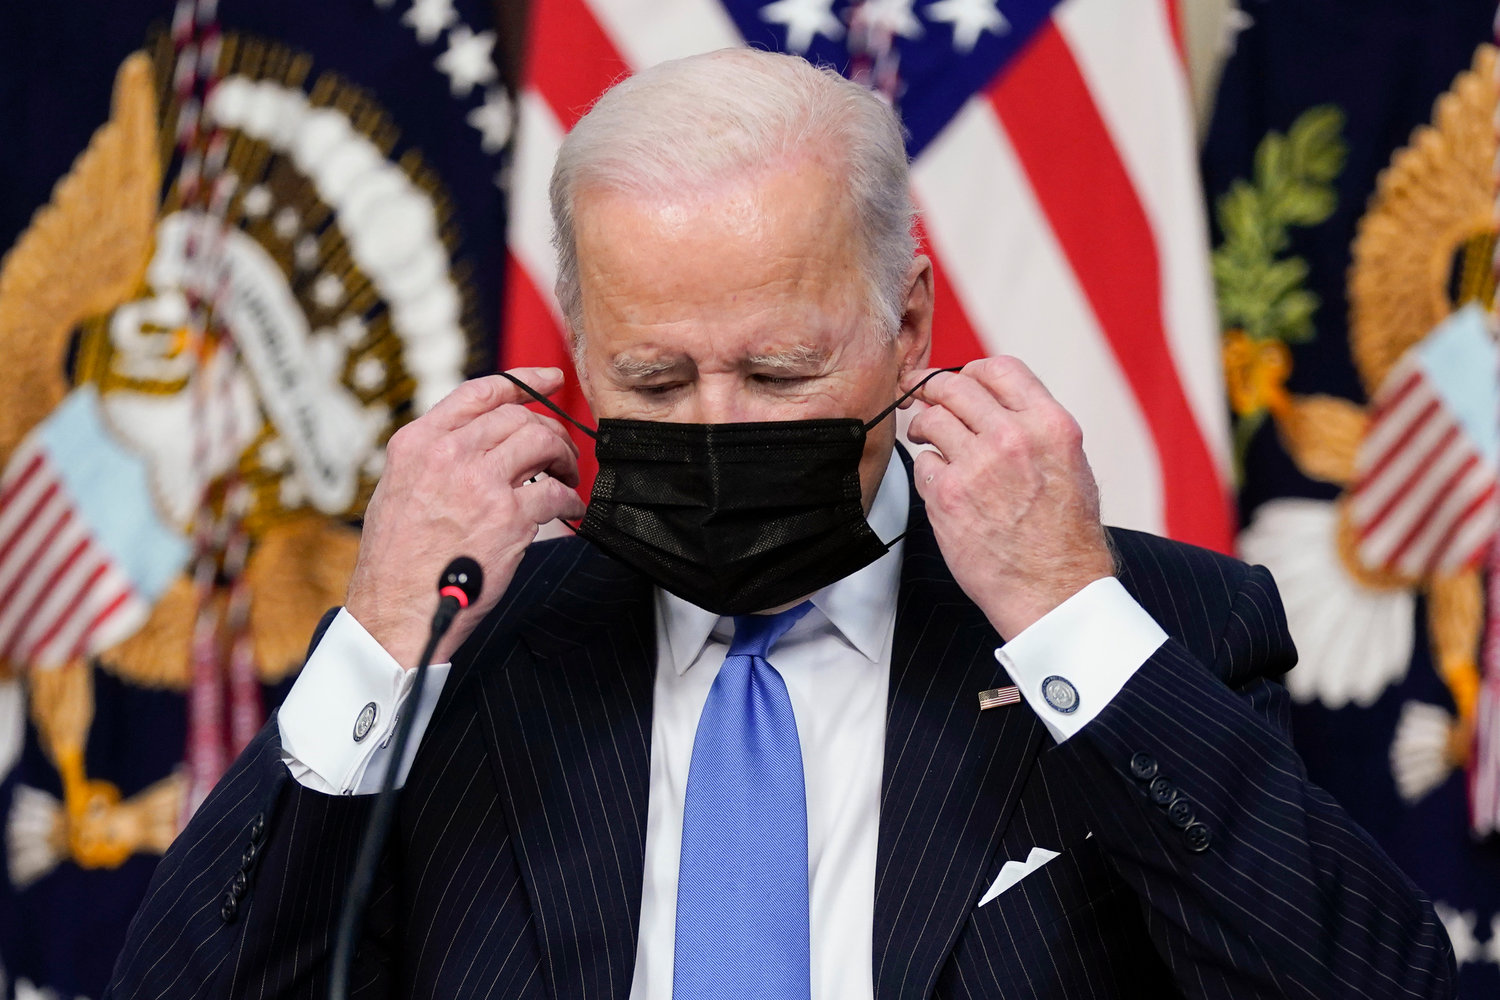 MASK TIME — President Joe Biden adjusts his face covering as he speaks during a meeting with business leaders about the holiday shopping season, in the library of the Eisenhower Executive Office Building on the White House campus Monday in Washington.